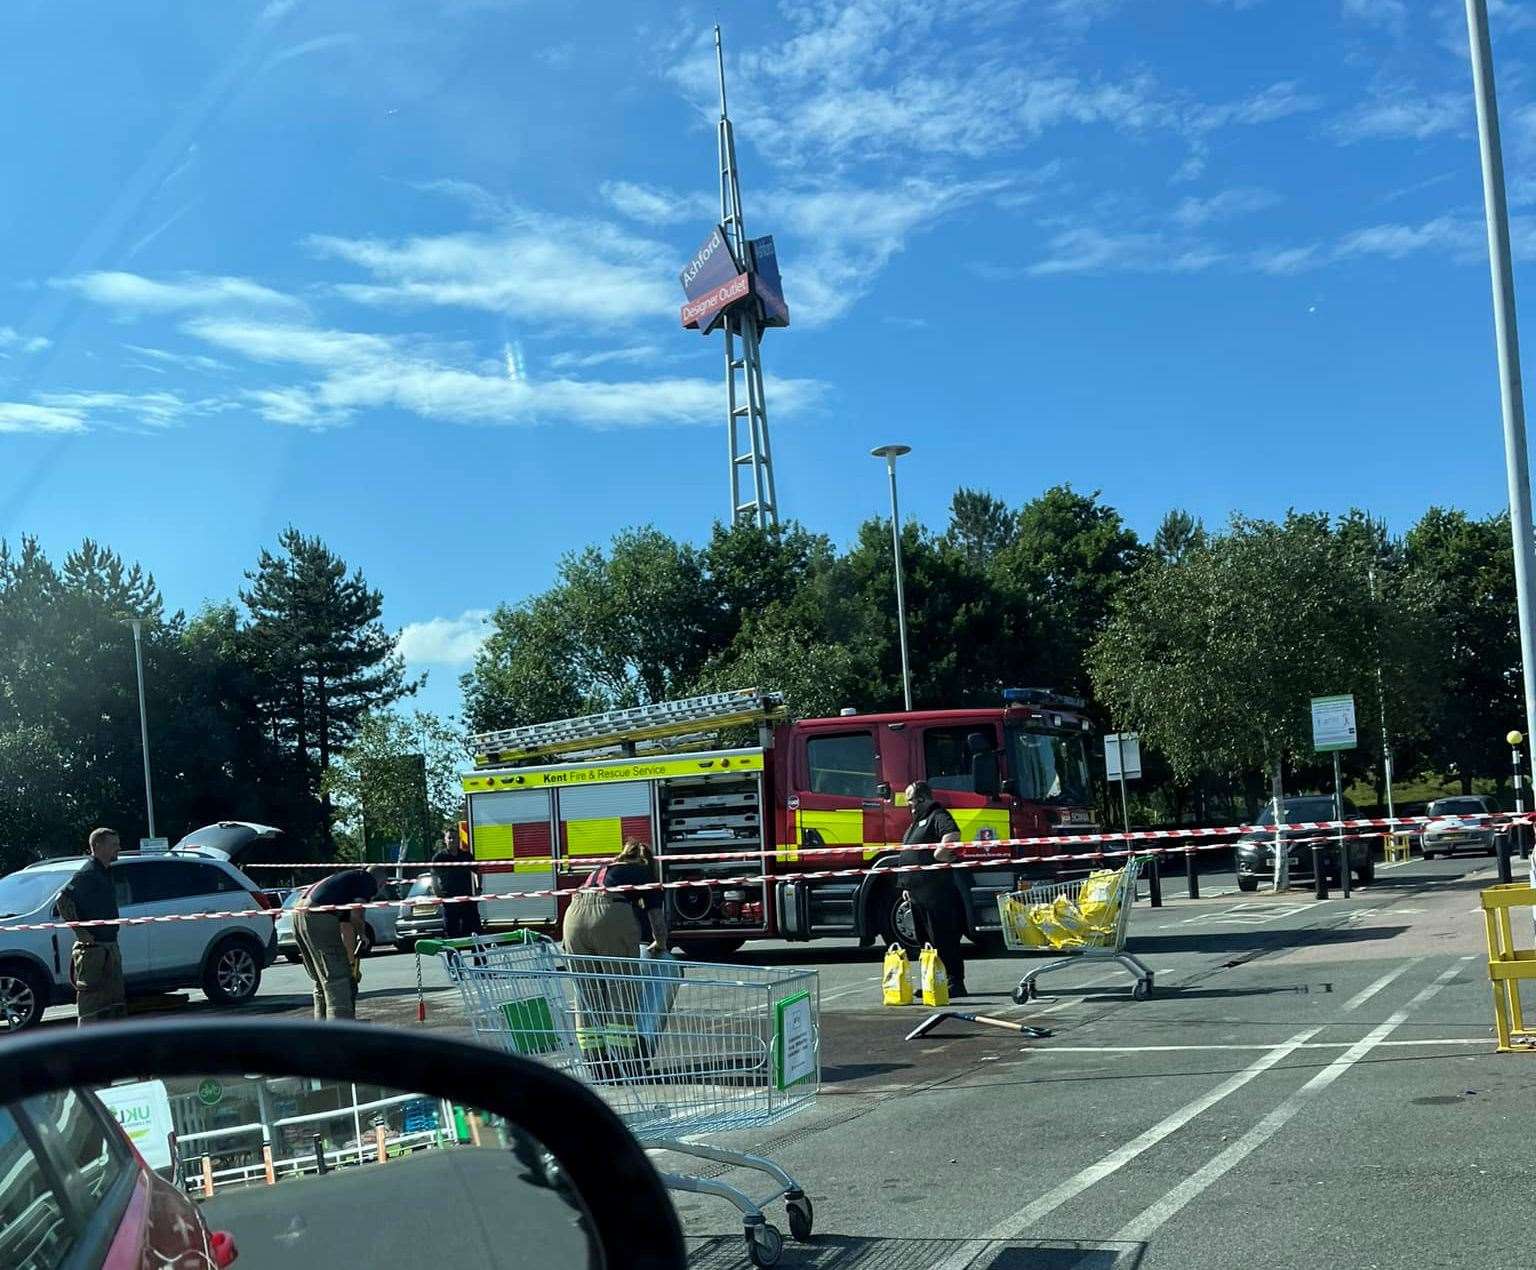 Firefighters have been pictured in Asda supermarket car park in Ashford this evening